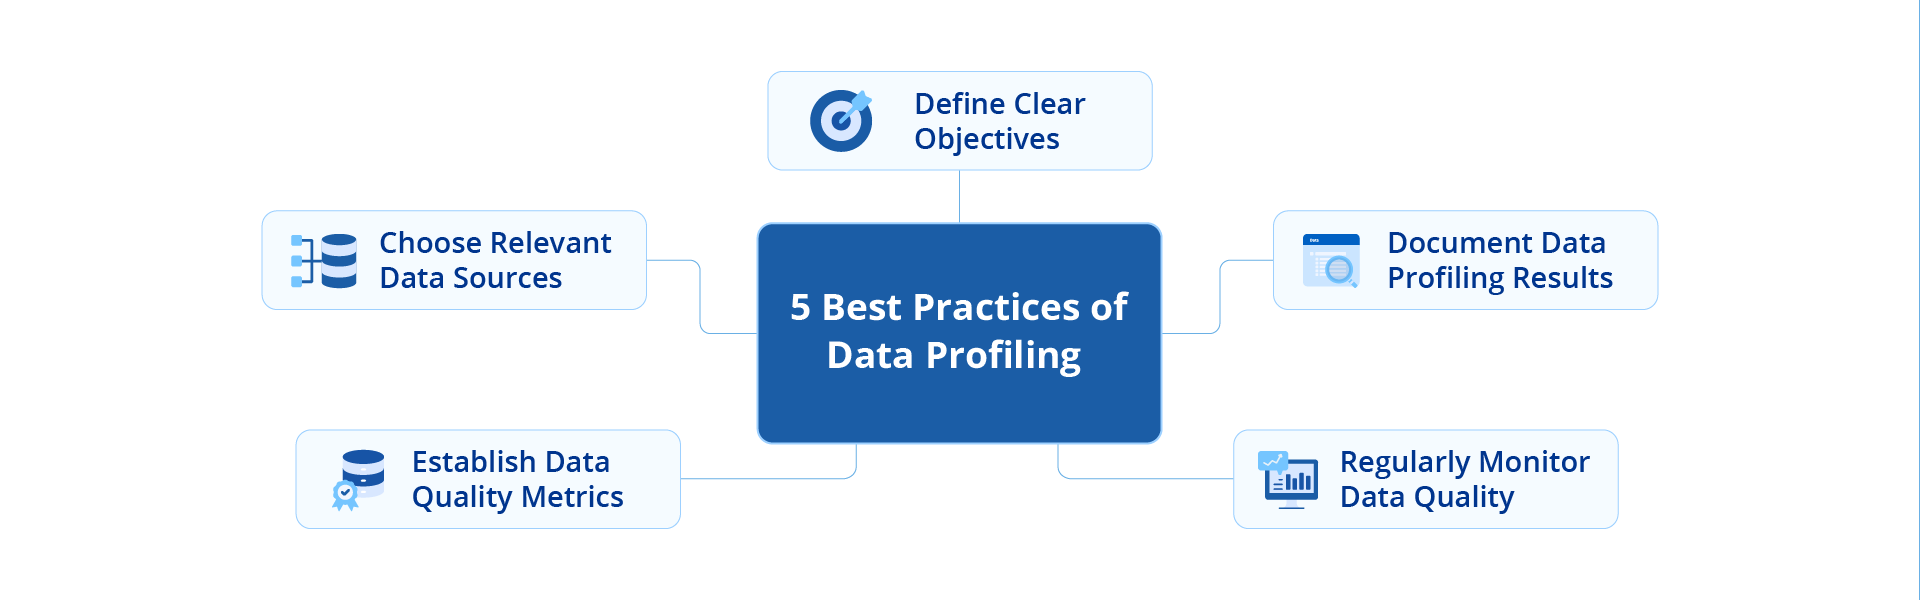 An image listing some data profiling best practices.